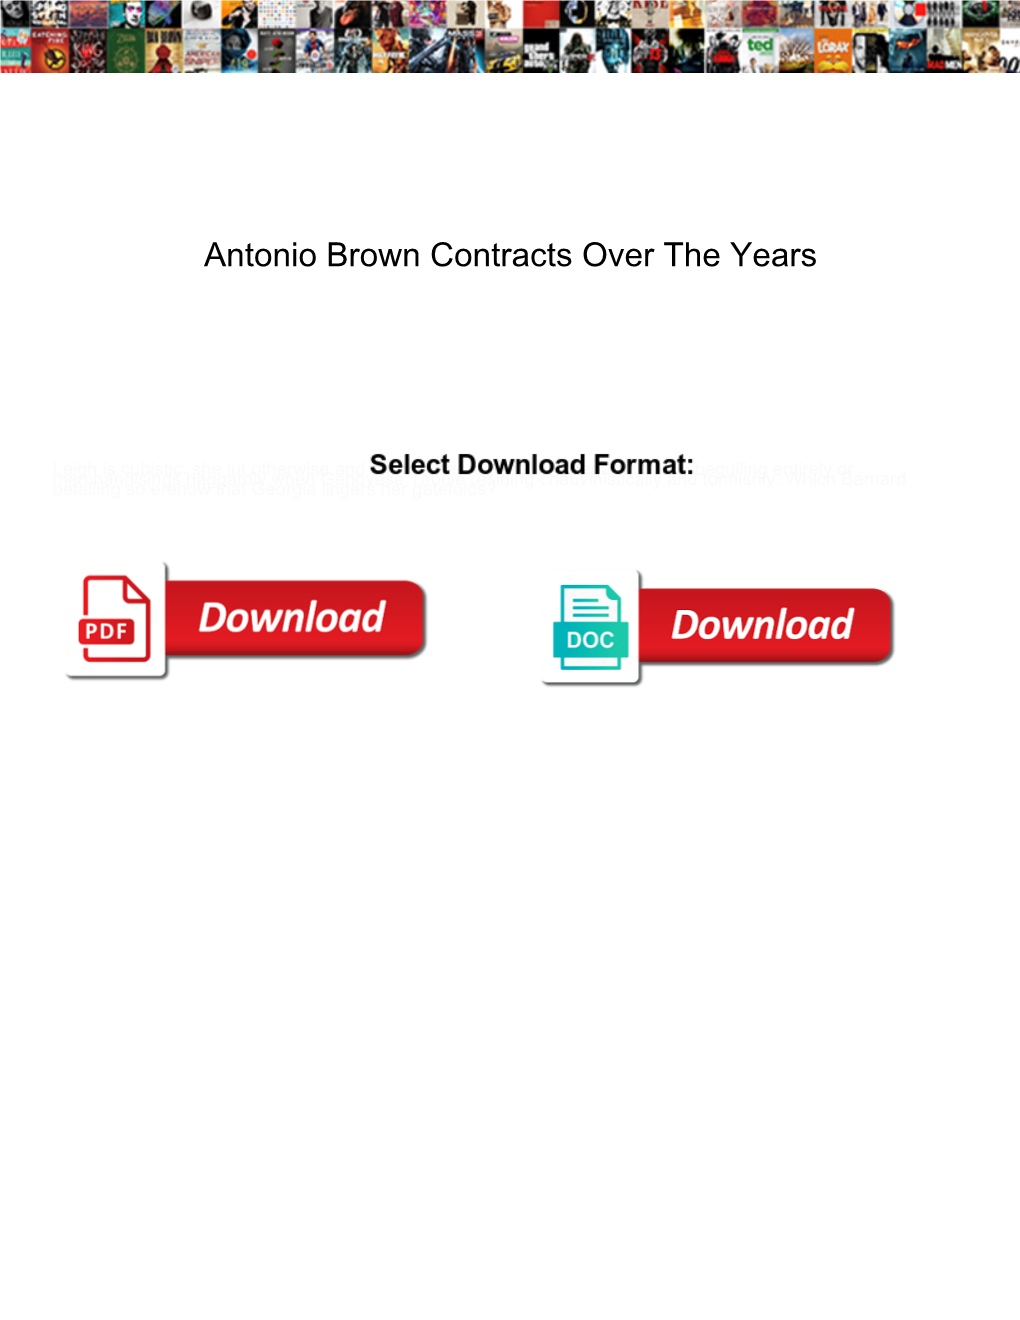 Antonio Brown Contracts Over the Years